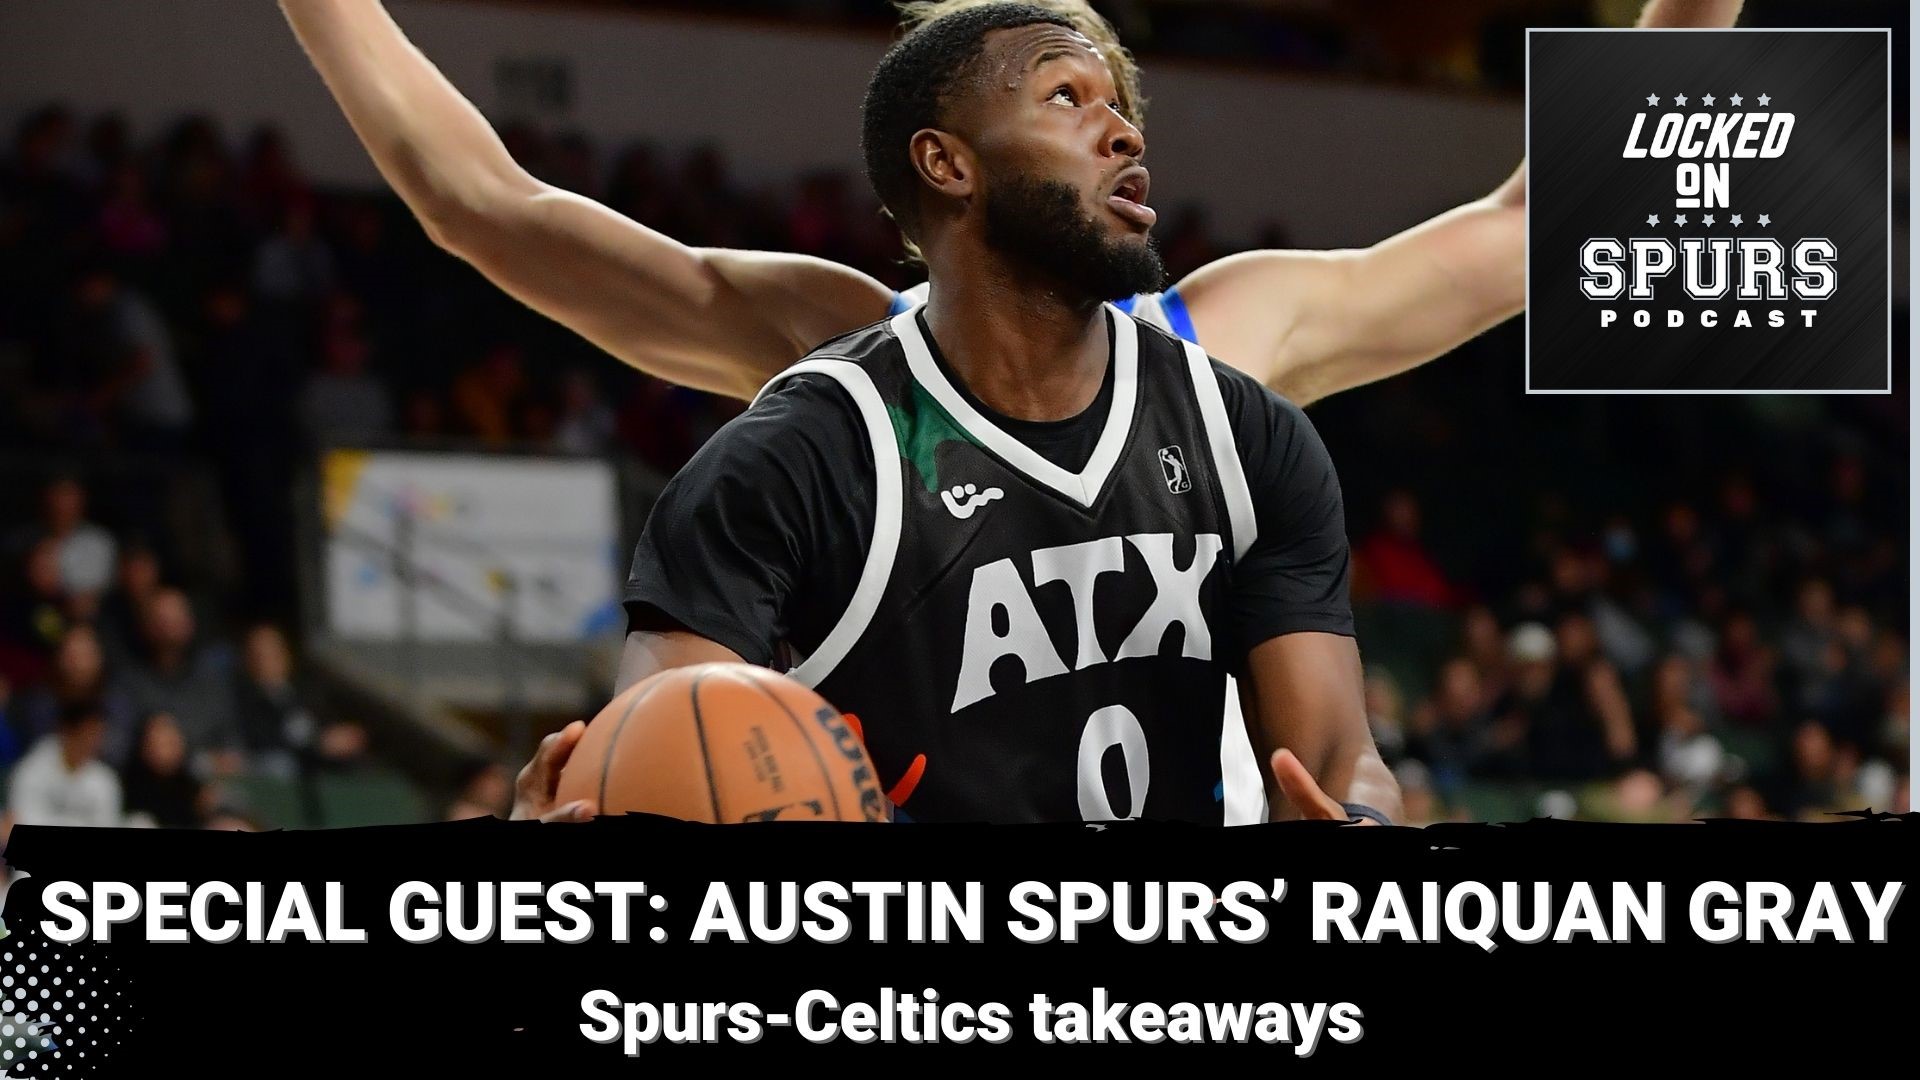 Gray stops by to talk about playing for the Spurs, his career-best season and more.